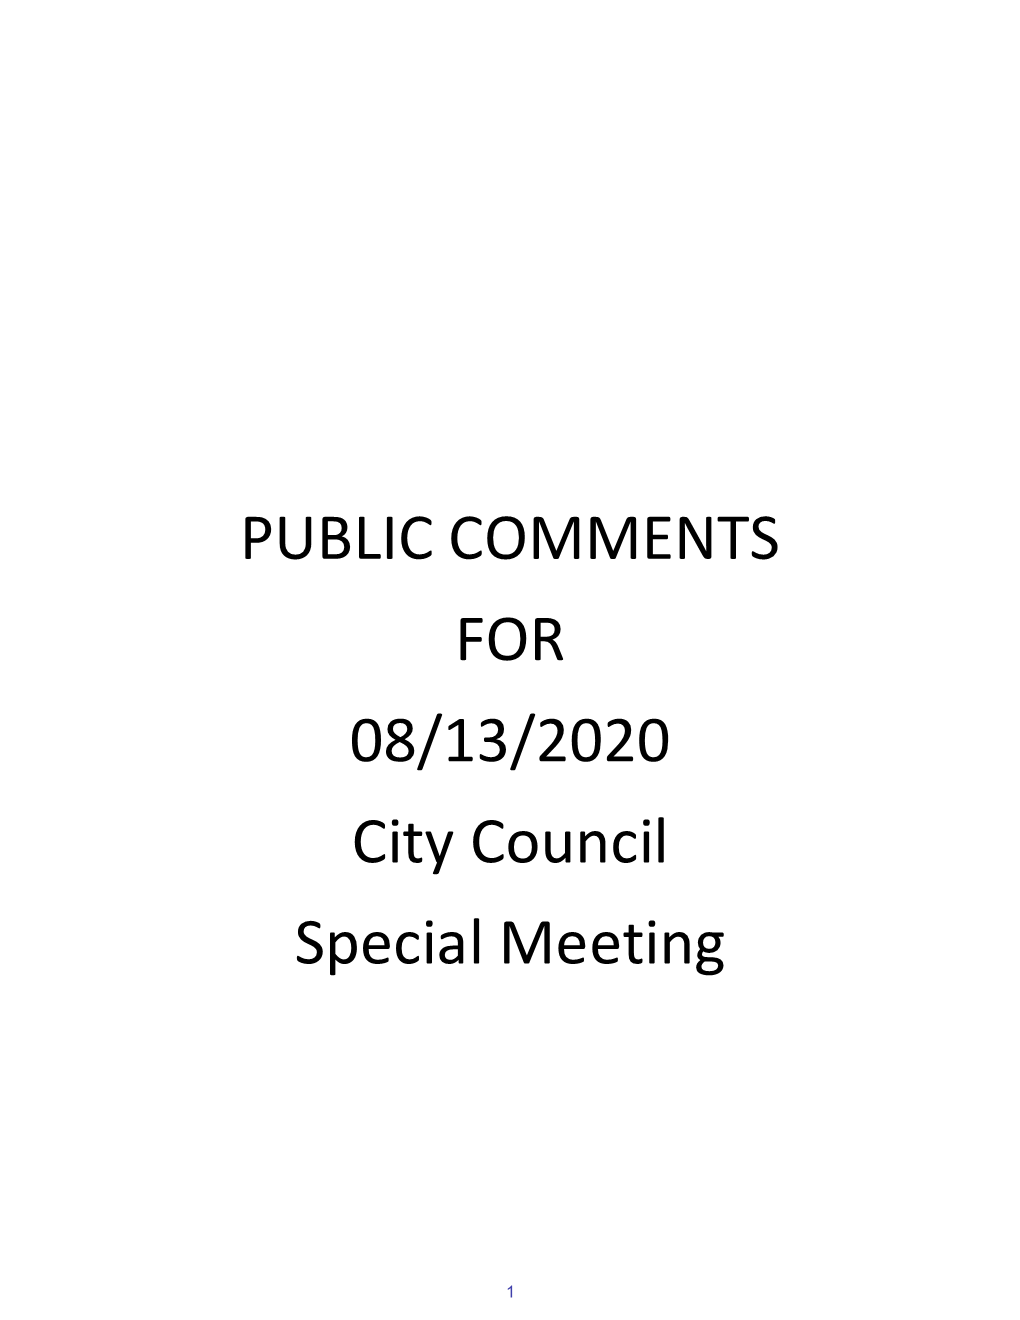 PUBLIC COMMENTS for 08/13/2020 City Council Special Meeting